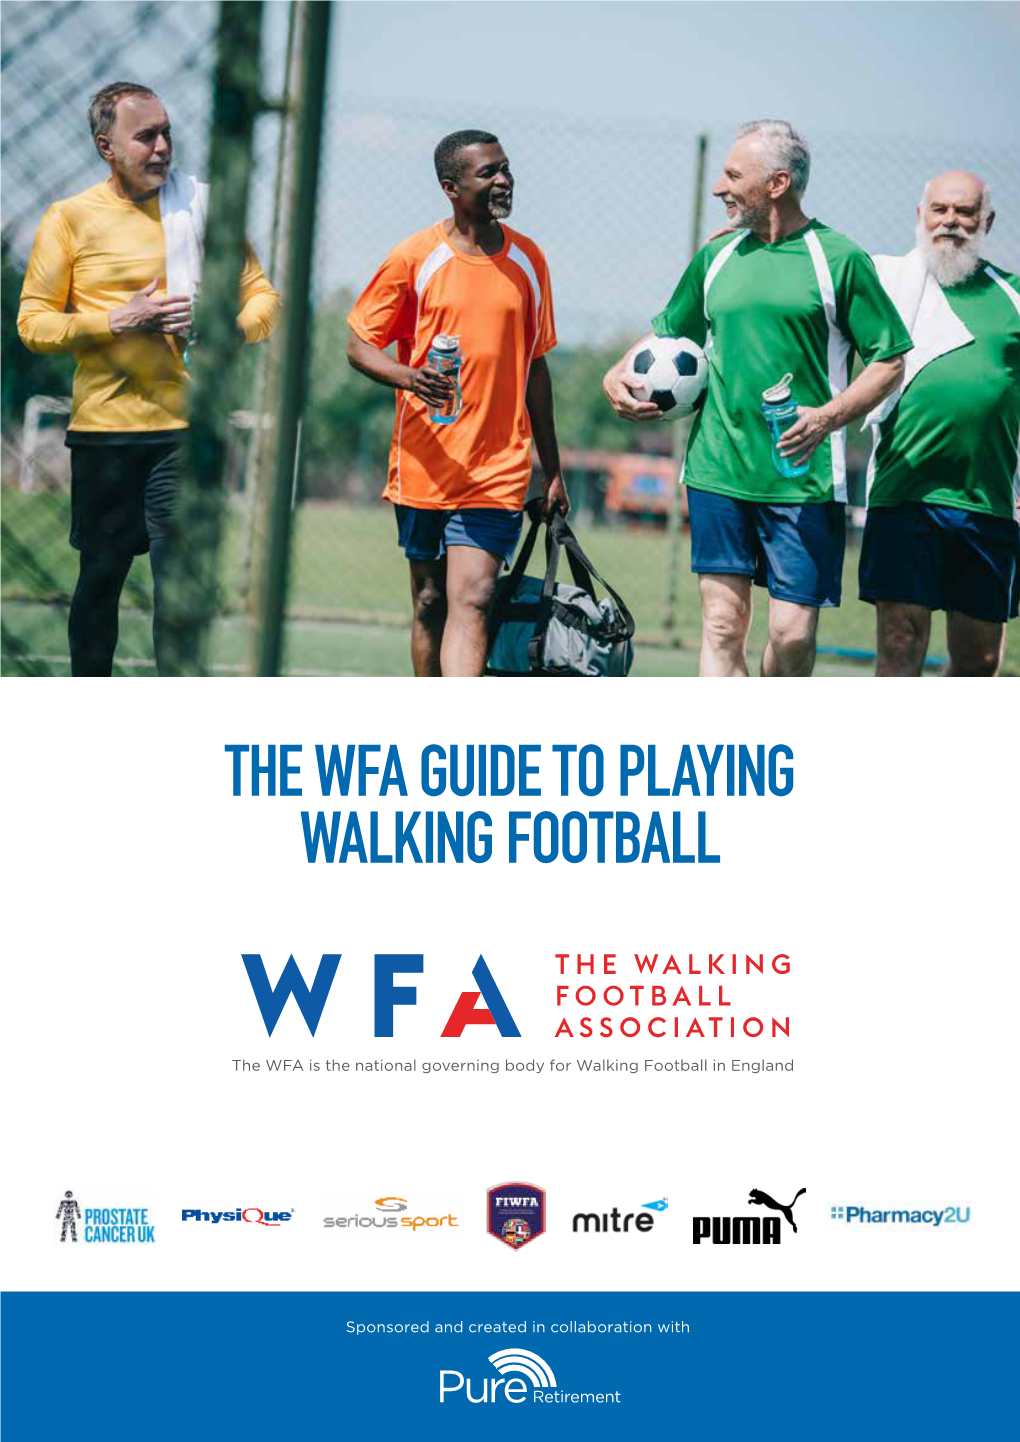 The Wfa Guide to Playing Walking Football